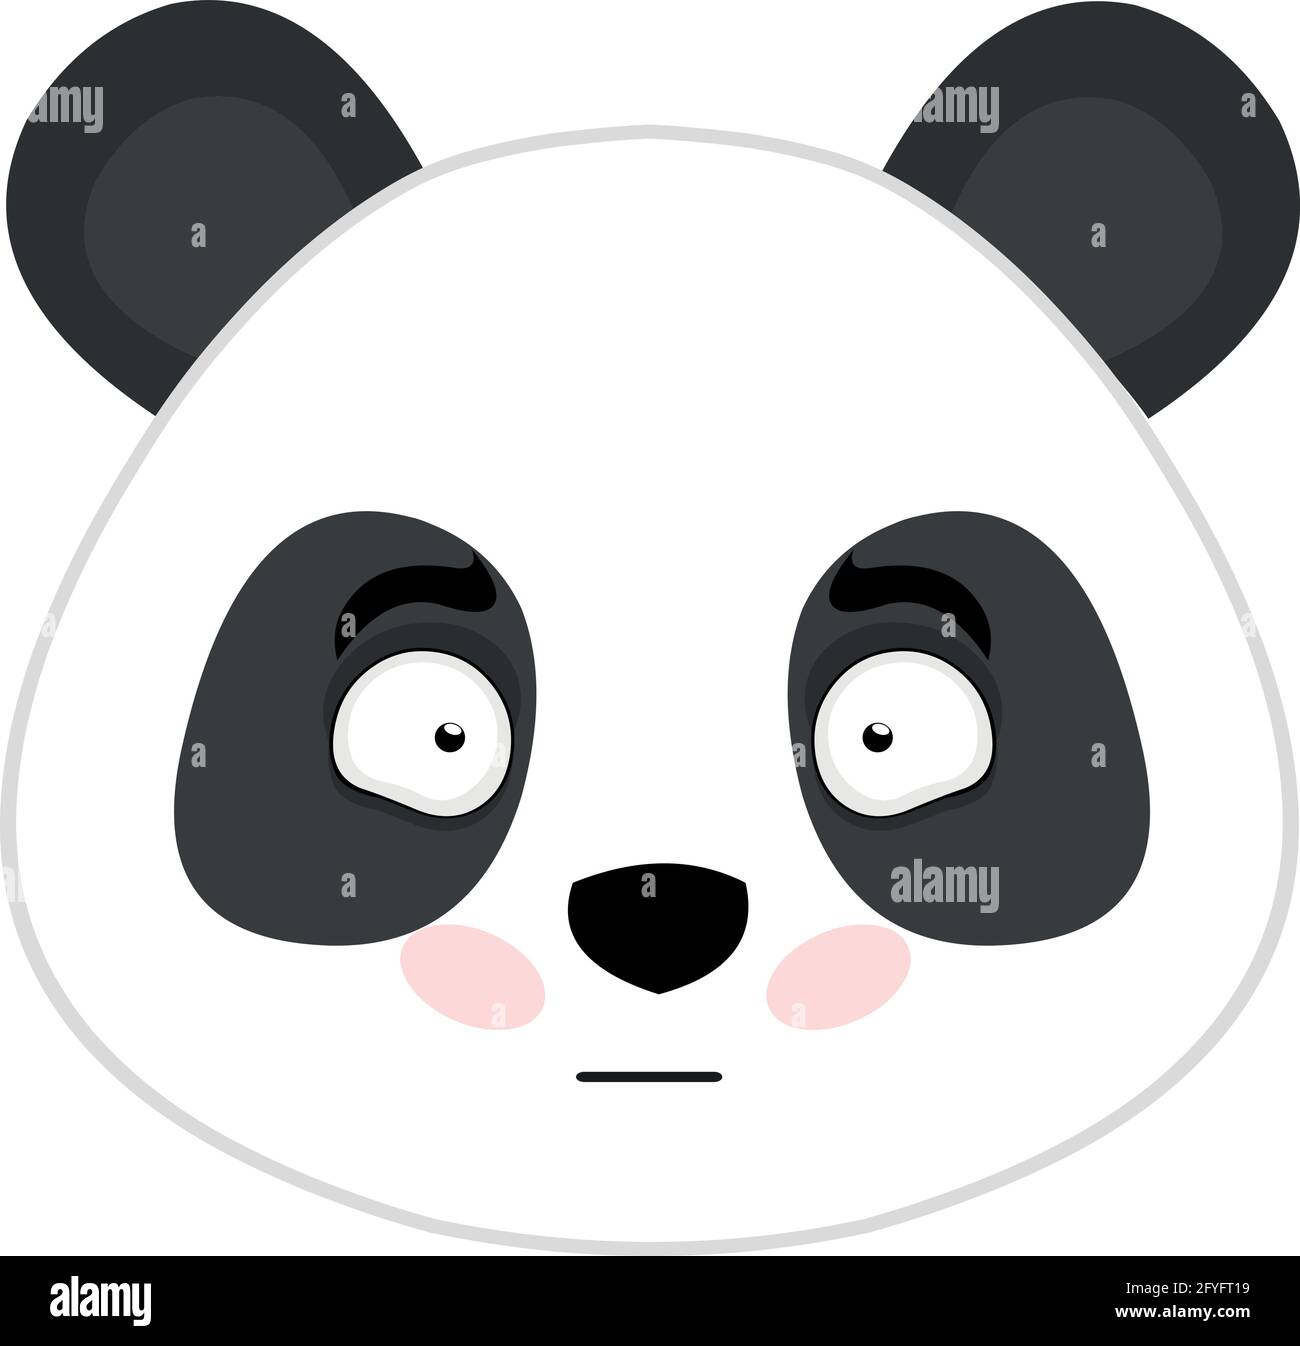 Vector emoticon illustration of the face of a cartoon panda bear with a blush on his face Stock Vector